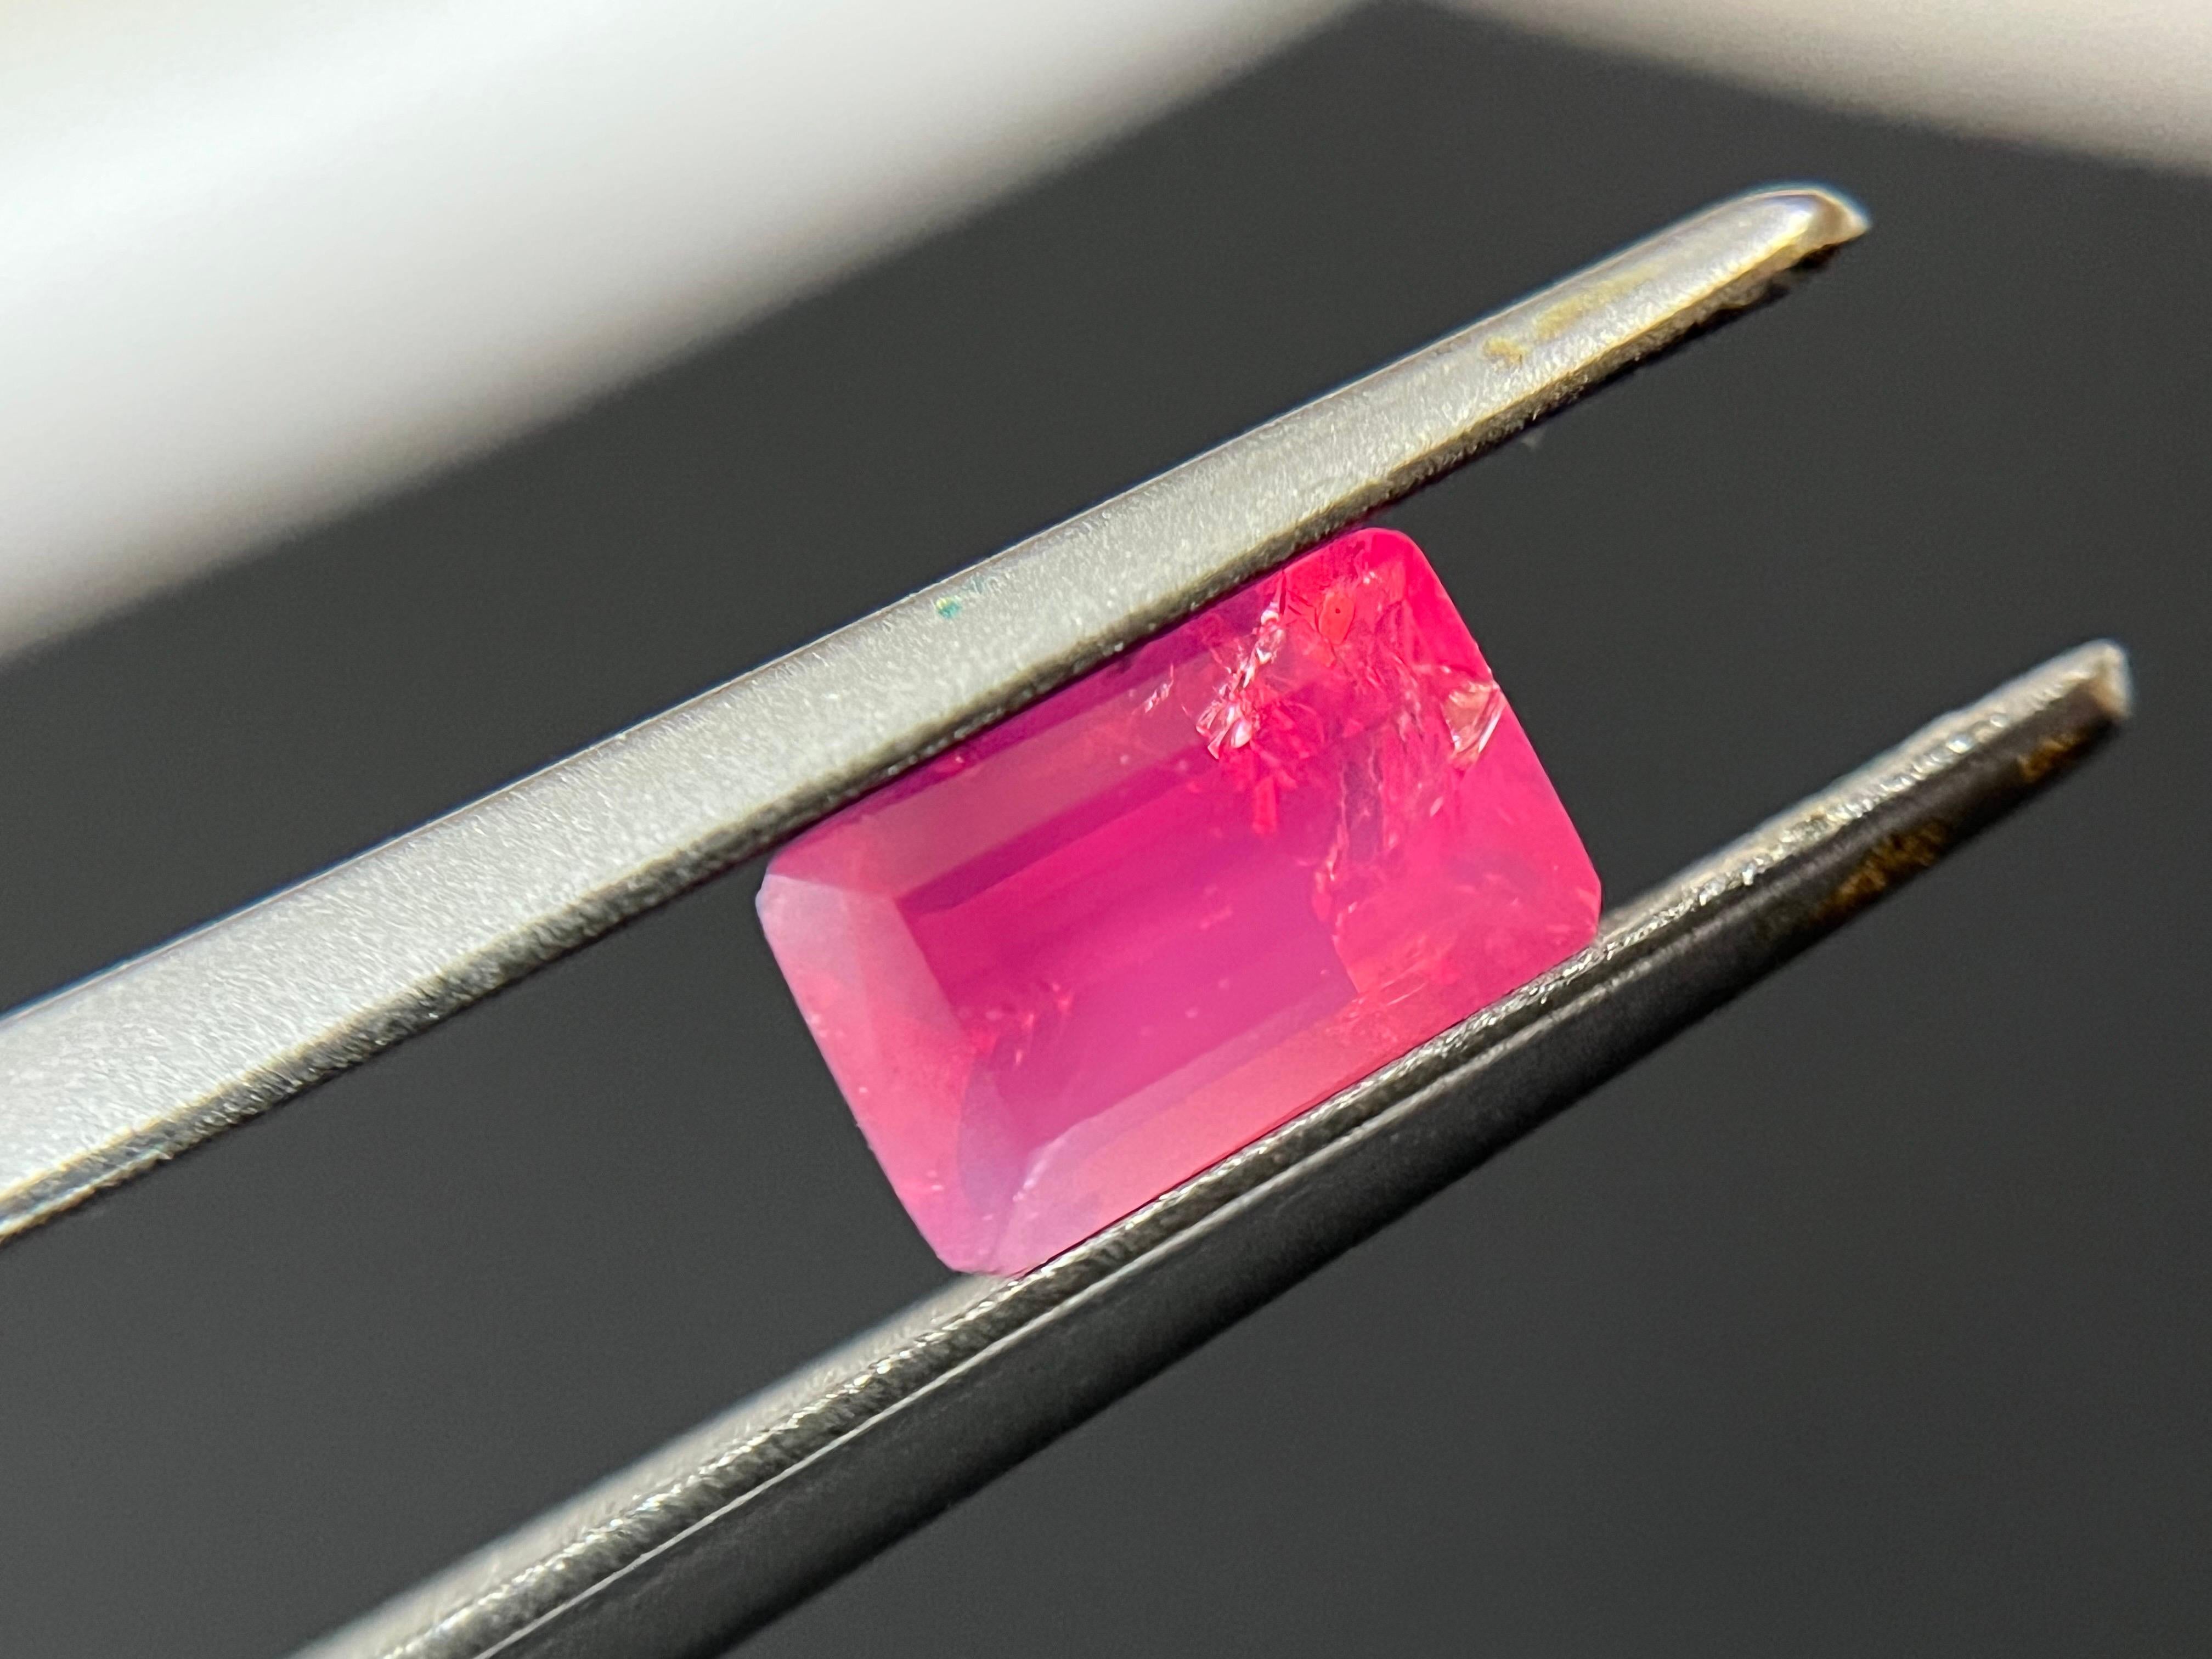 Introducing our exceptional Mahenge spinel with a silky body neon pink color and orange fire that is truly one-of-a-kind. This gemstone is a marvel of nature, with its rare and captivating hue that exudes warmth and vitality.

Sourced from the